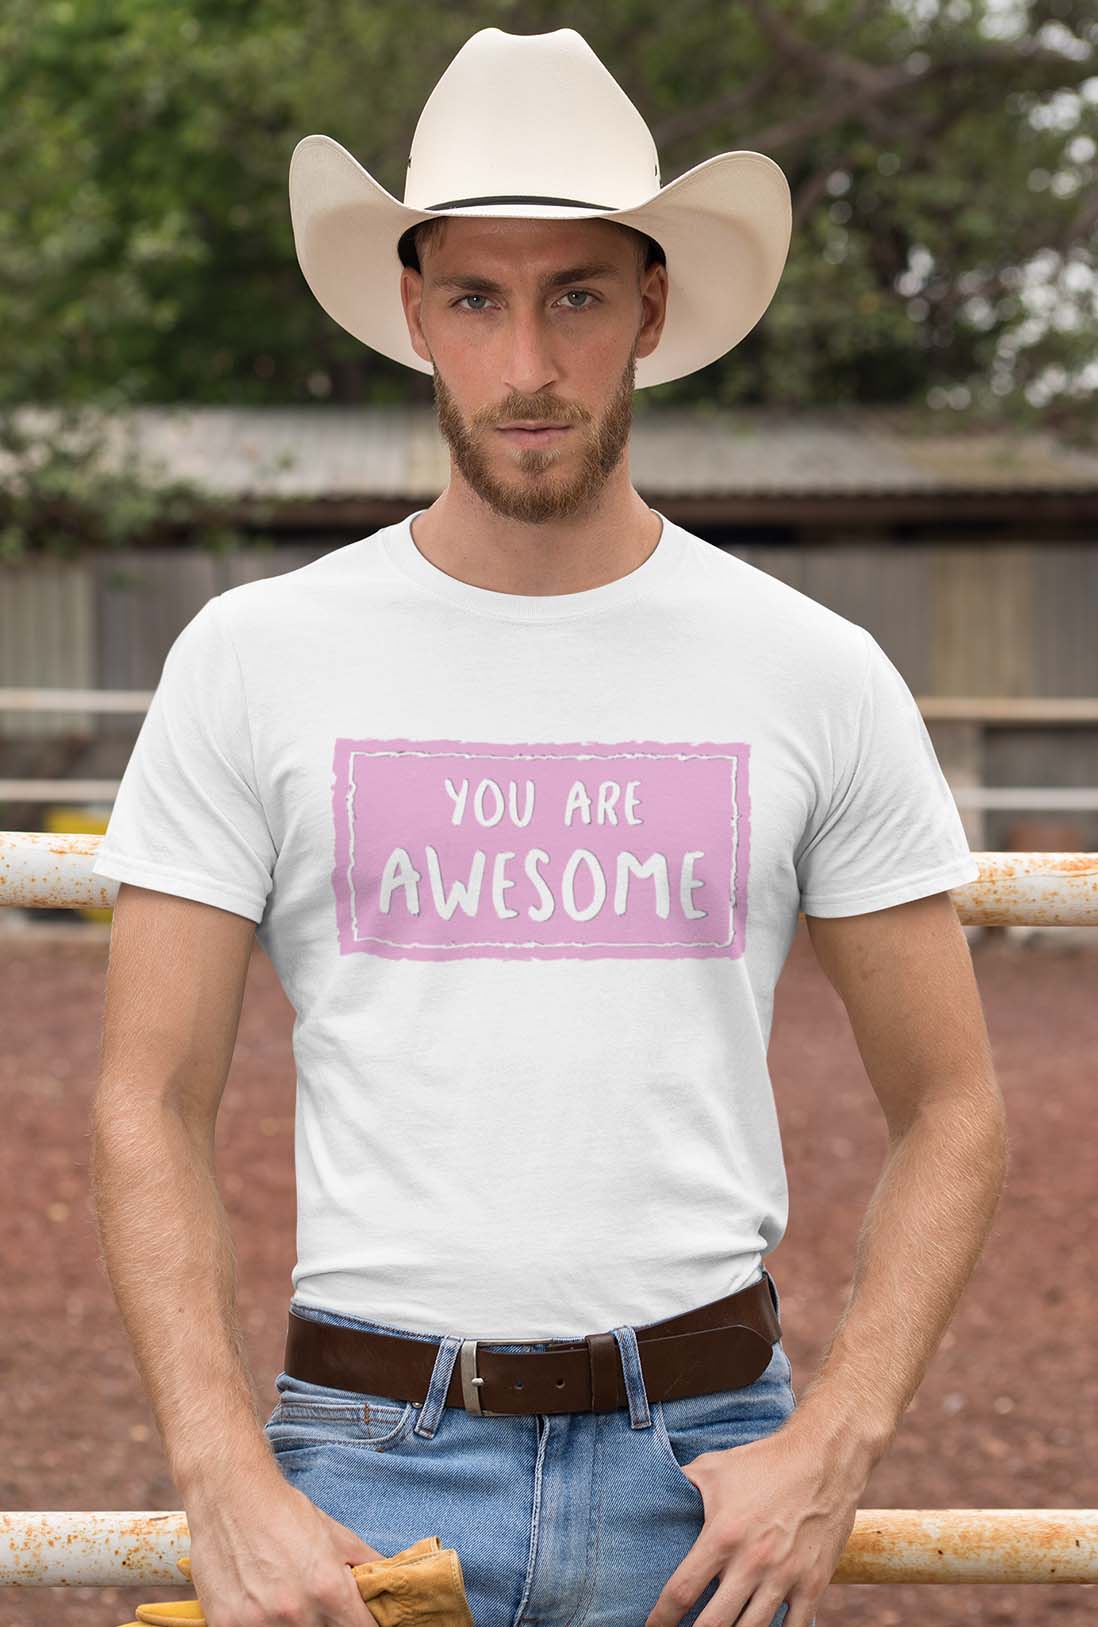 You Are Awesome Men's Cotton T-Shirt